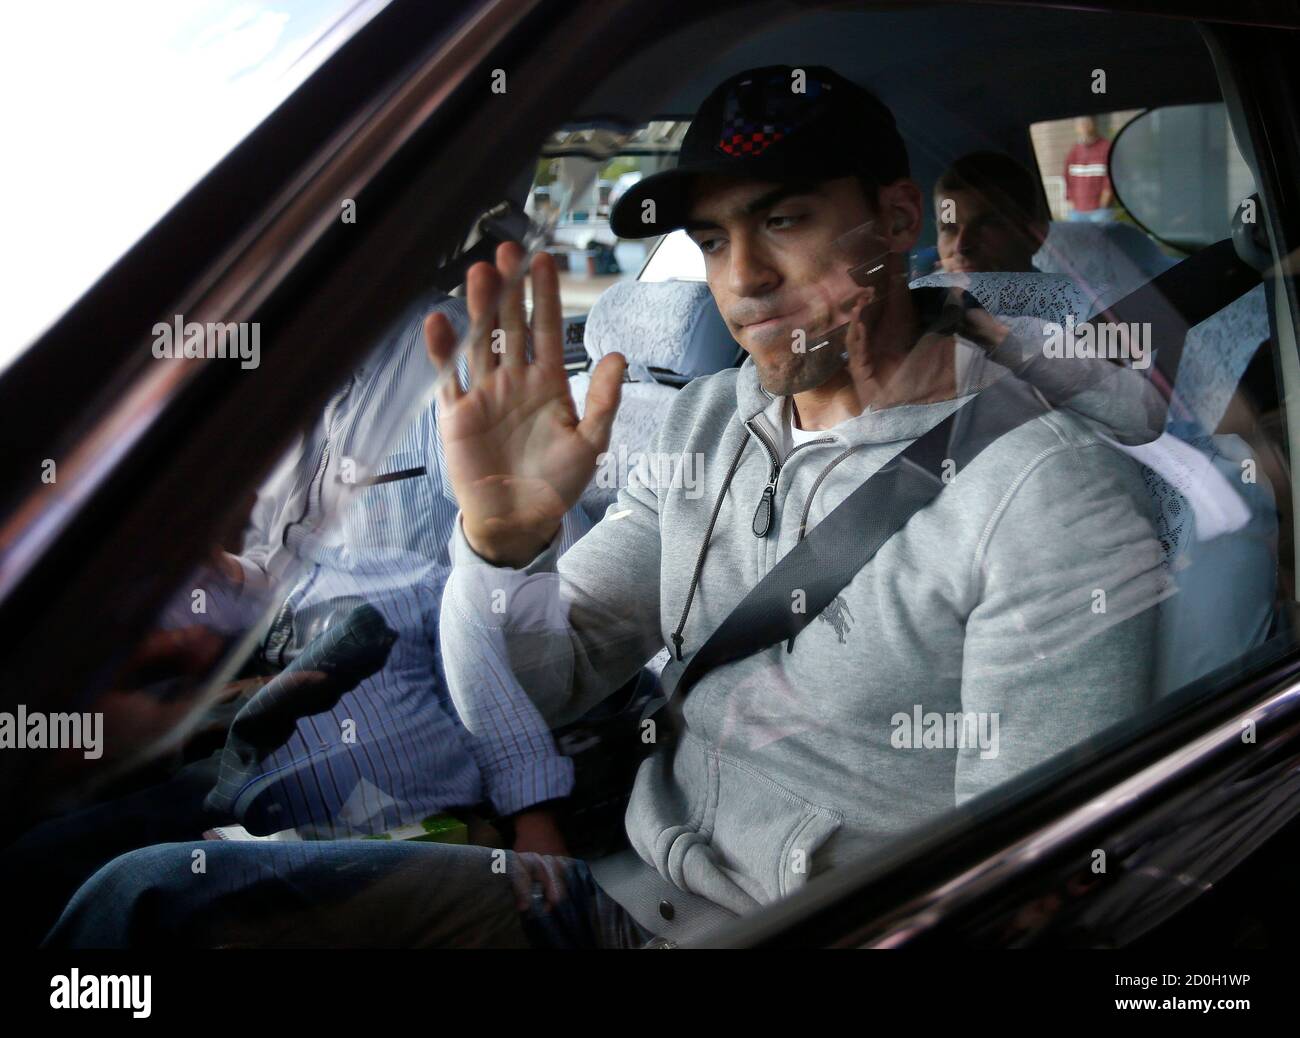 Lotus Formula One driver Pastor Maldonado of Venezuela gets on a taxi after visiting the hospital where Marussia Formula One driver Jules Bianchi of France is hospitalized, in Yokkaichi, Mie prefecture, October 6, 2014. Bianchi was fighting for his life on Sunday after suffering a severe head injury and undergoing surgery following a Japanese Grand Prix crash. Formula One's governing body said the 25-year-old lost control of his Marussia on the wet track, travelled across the runoff area and hit the rear of a recovery tractor which was trying to remove a stricken Sauber. REUTERS/Toru Hanai (JA Stock Photo